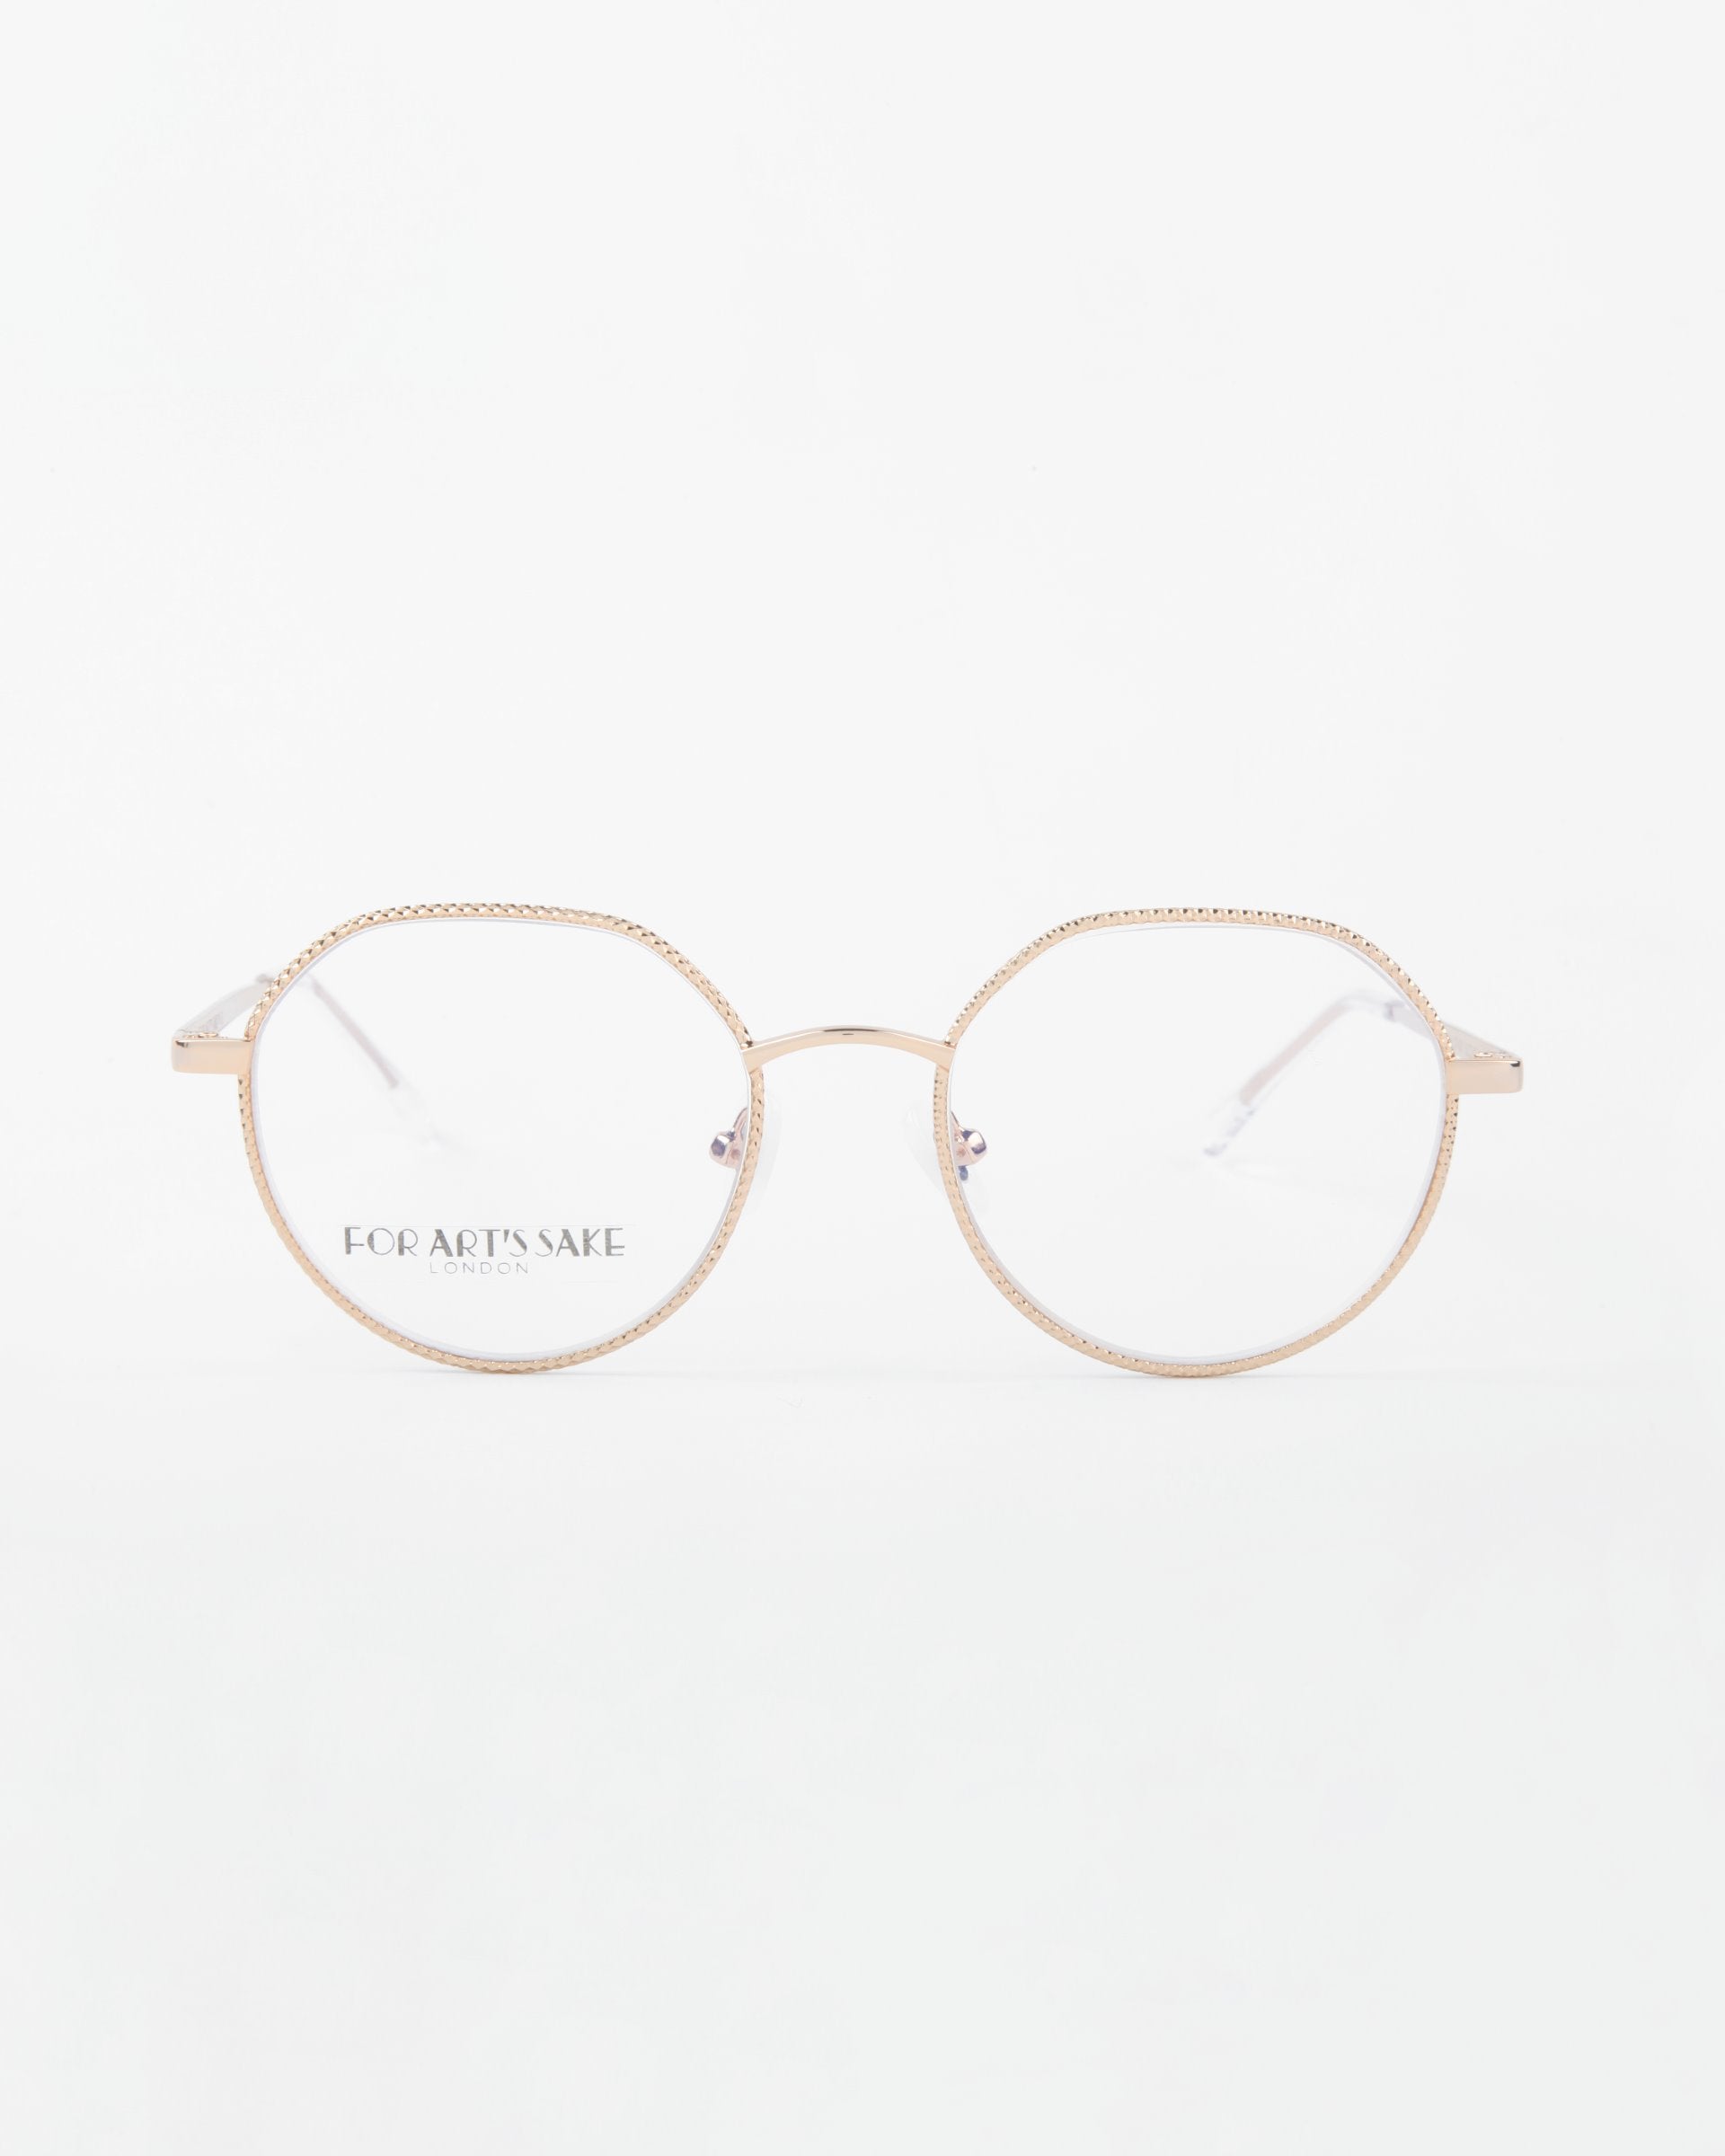 A pair of Hope eyeglasses by For Art&#39;s Sake® with thin, 18-karat gold-plated frames and clear lenses. The words &quot;For Art&#39;s Sake&quot; are visible on one of the lenses. The background is white, emphasizing the minimalist design of the glasses. These stylish frames can also come with a Blue Light Filter for added protection.